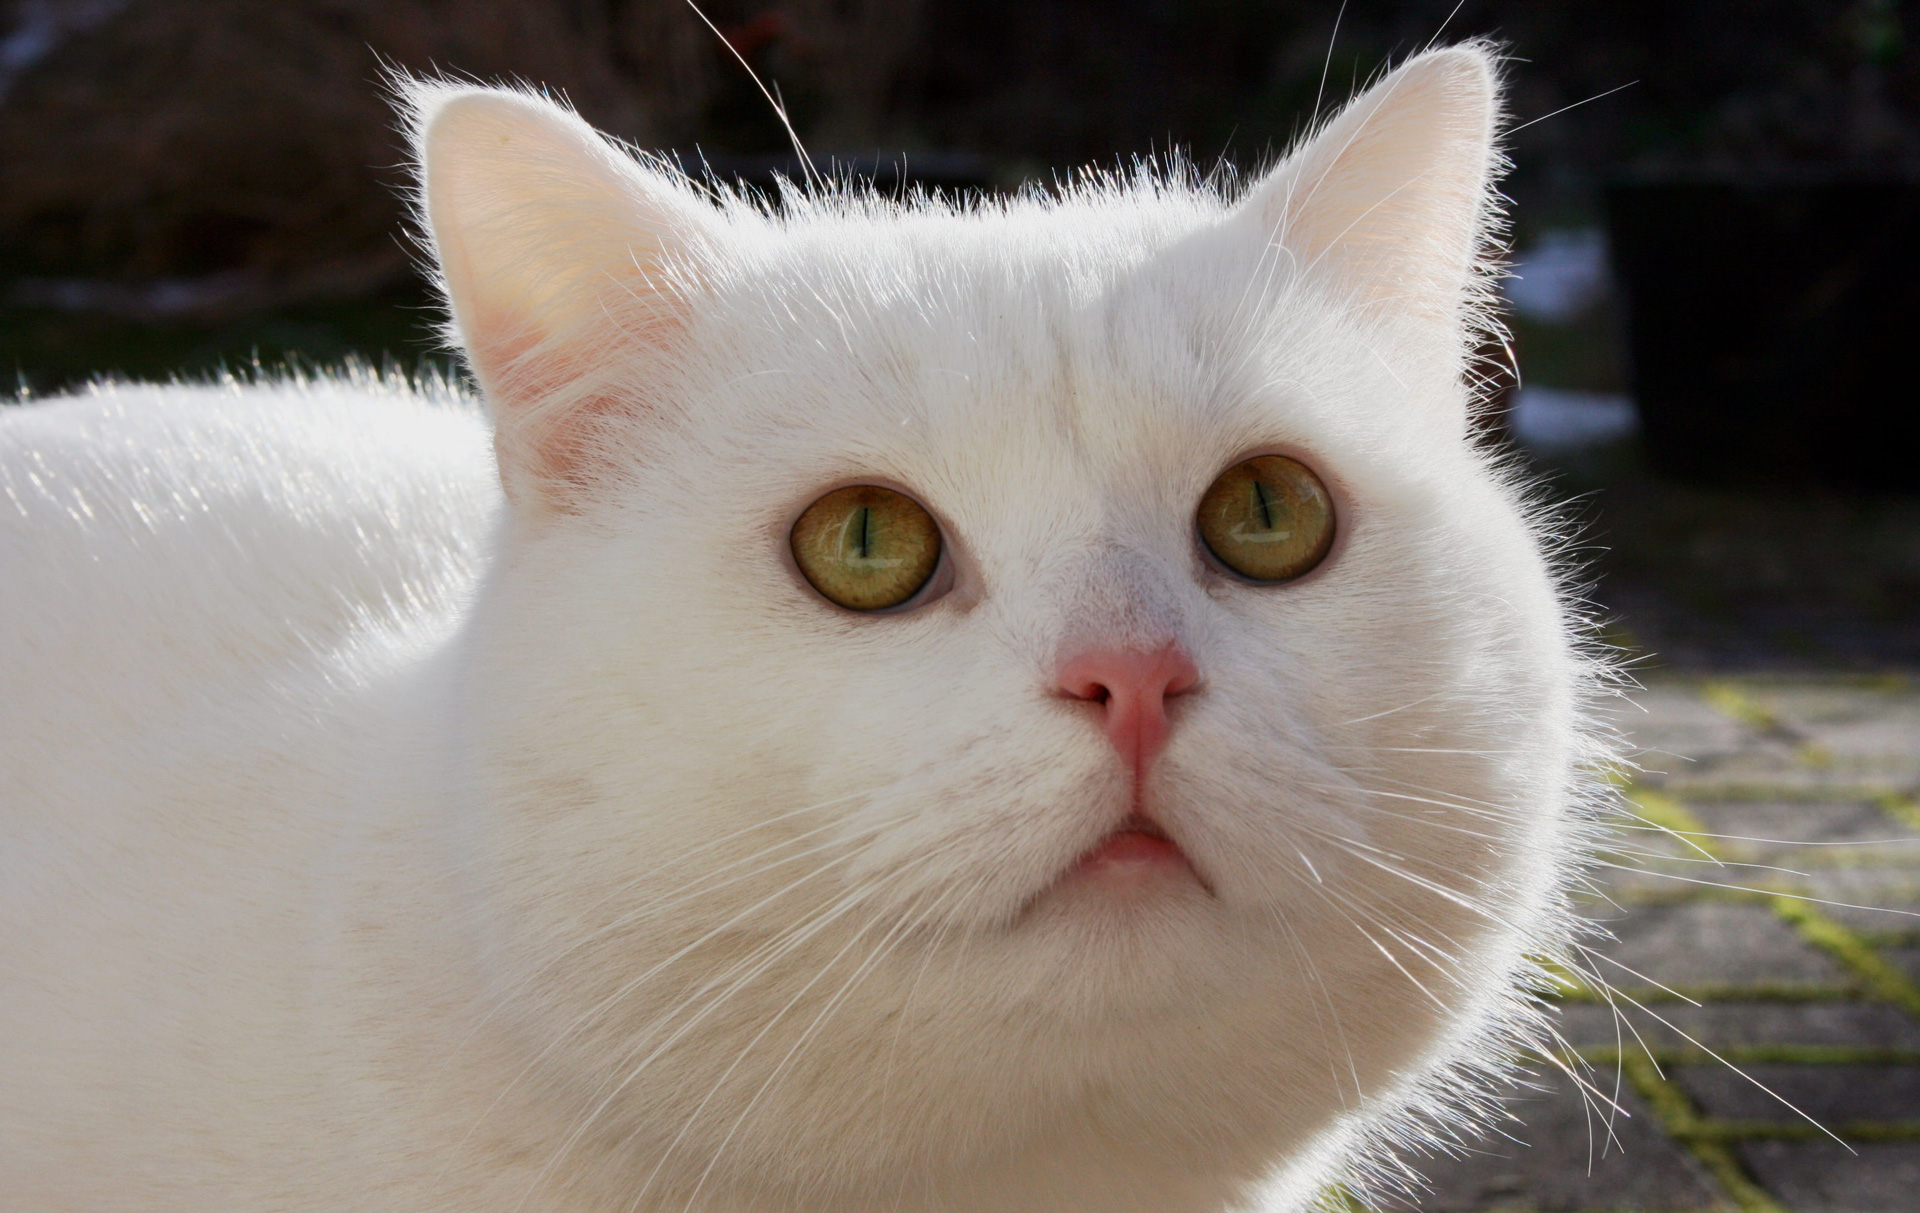 How Many Whiskers Does A White Cat Have?